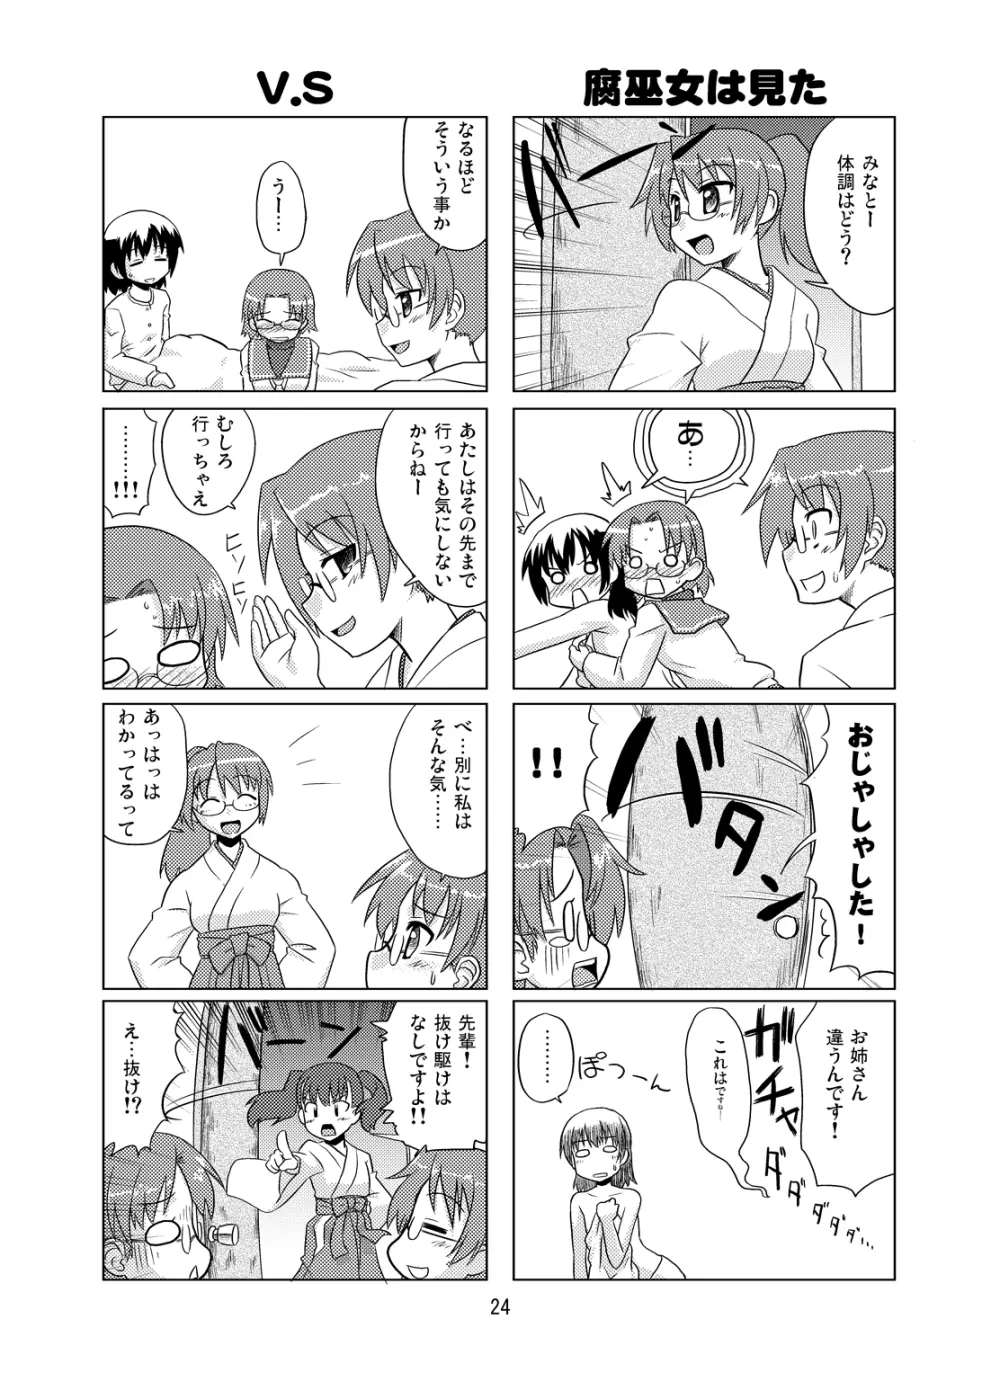 Composition Mix 8 はじマル！6 - page23